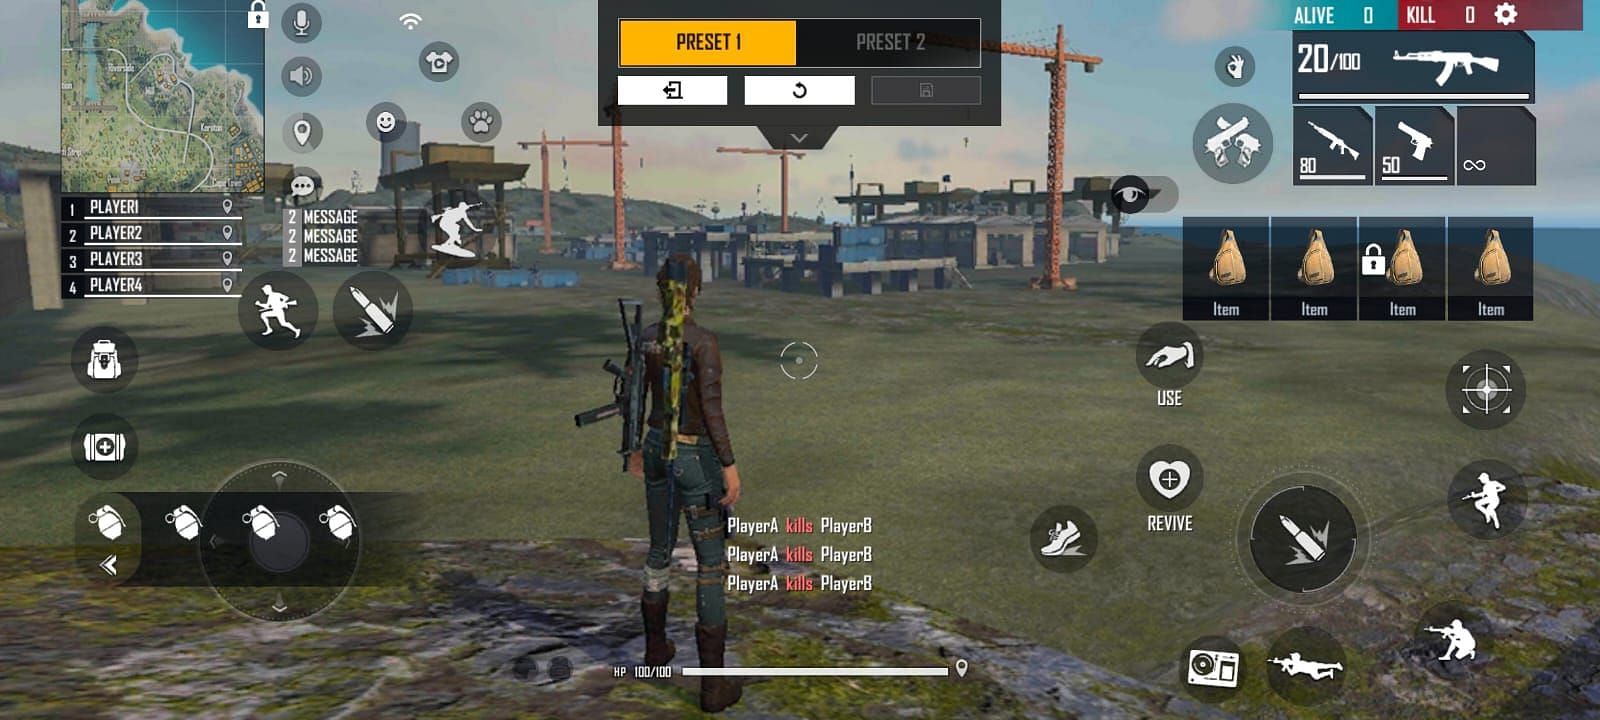 The HUD should be customized as per the comfort and grip (Image via Garena Free Fire)